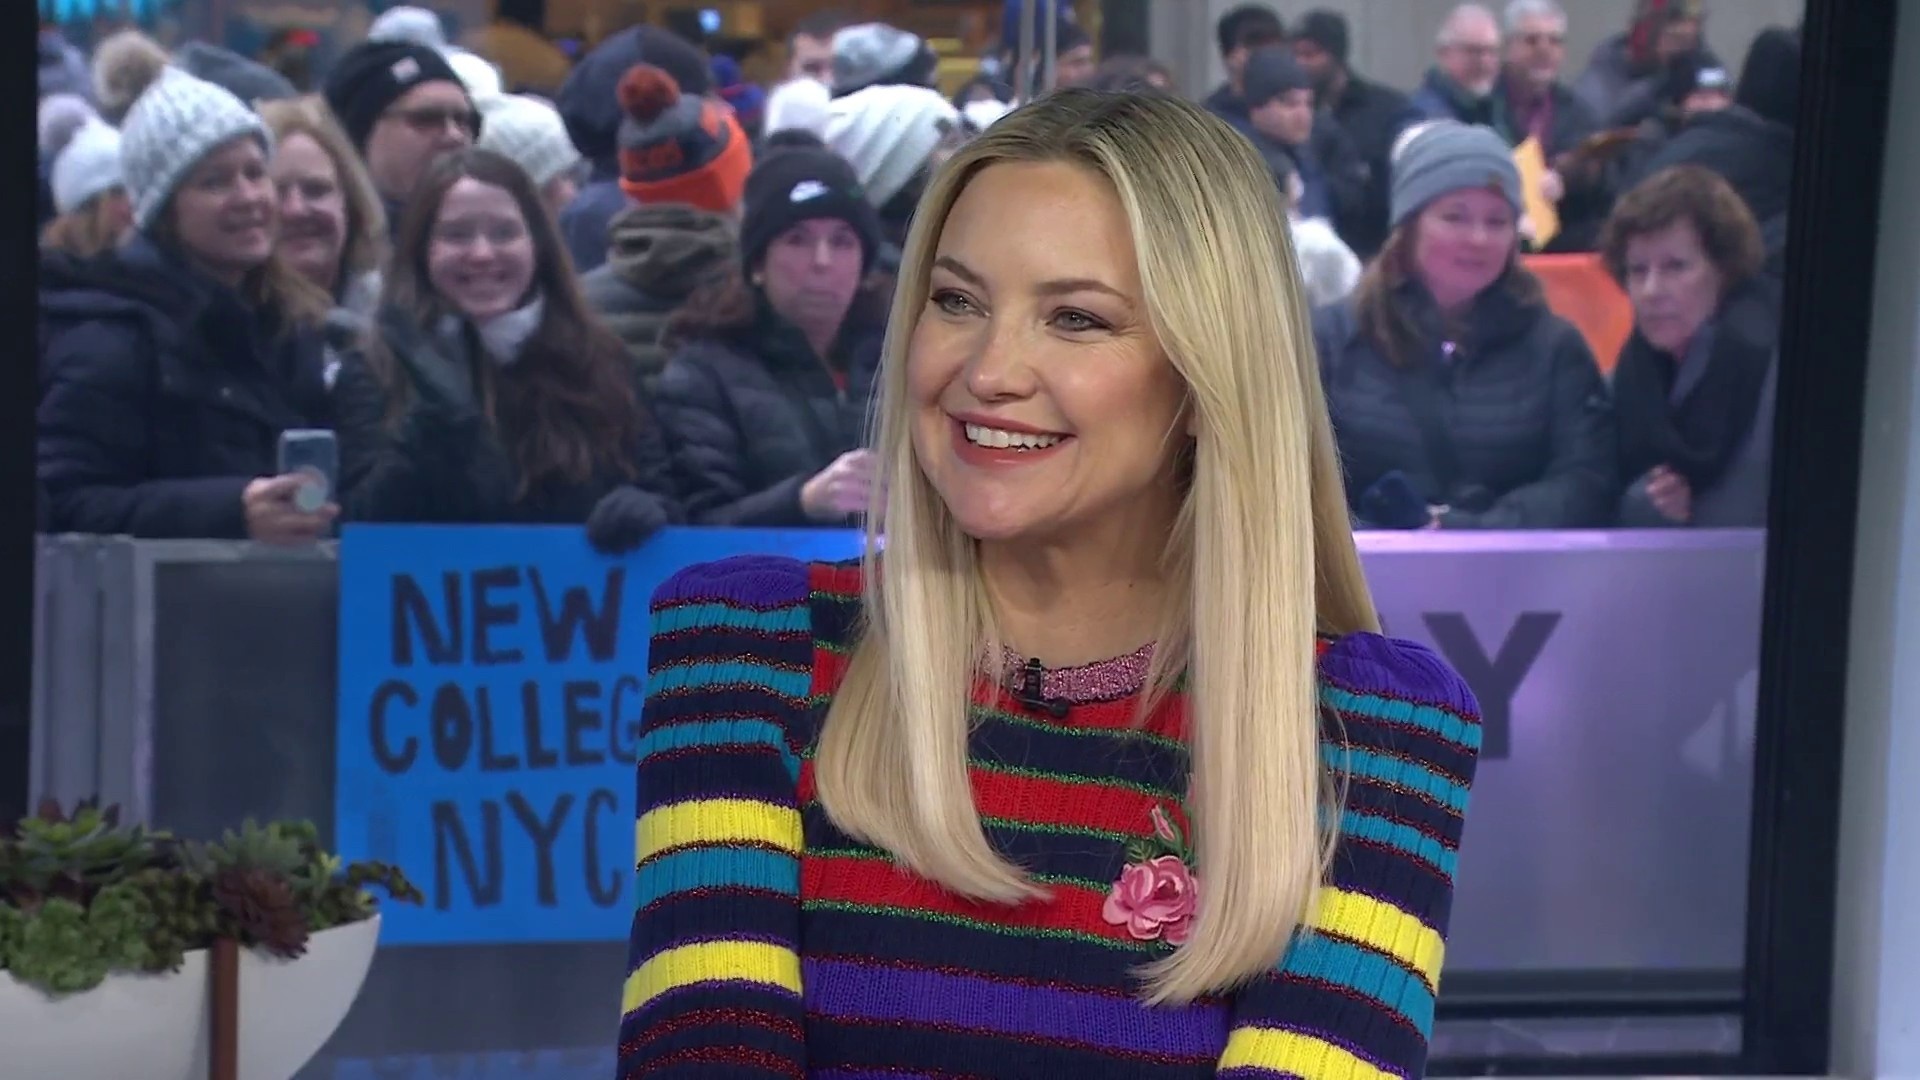 Kate Hudson talks new album, 'It's the most vulnerable I've been